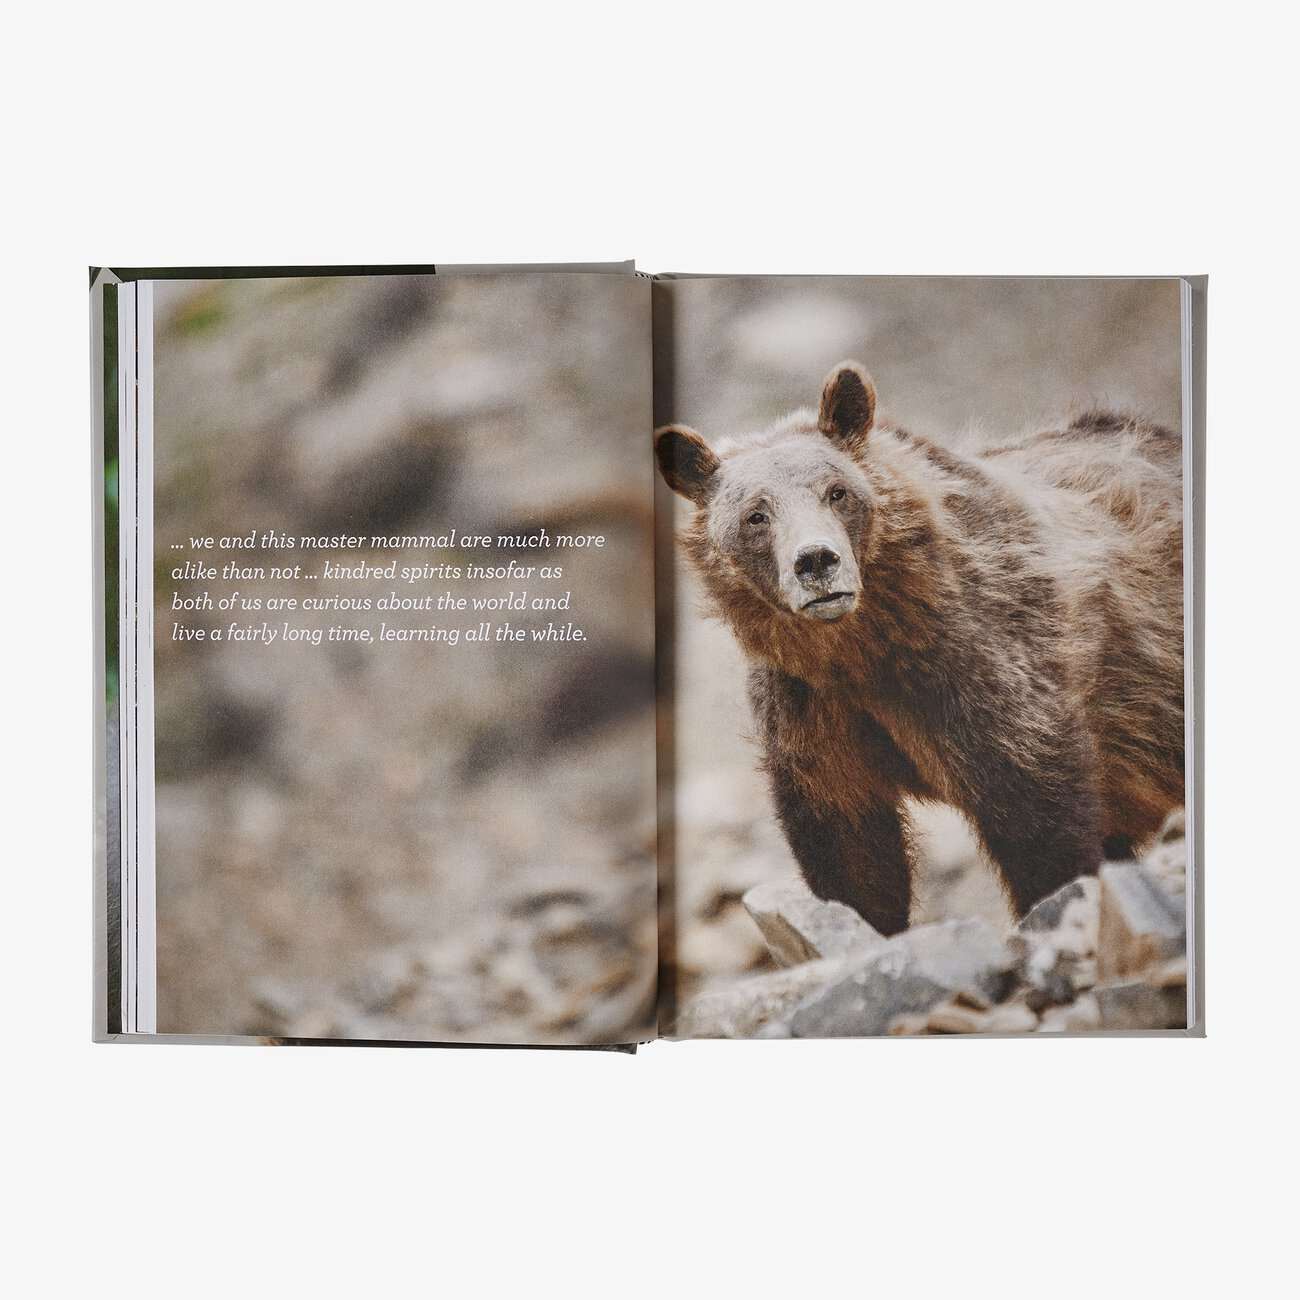 Four Fifths a Grizzly: A New Perspective on Nature that Just Might Save Us All (By Douglas Chadwick)